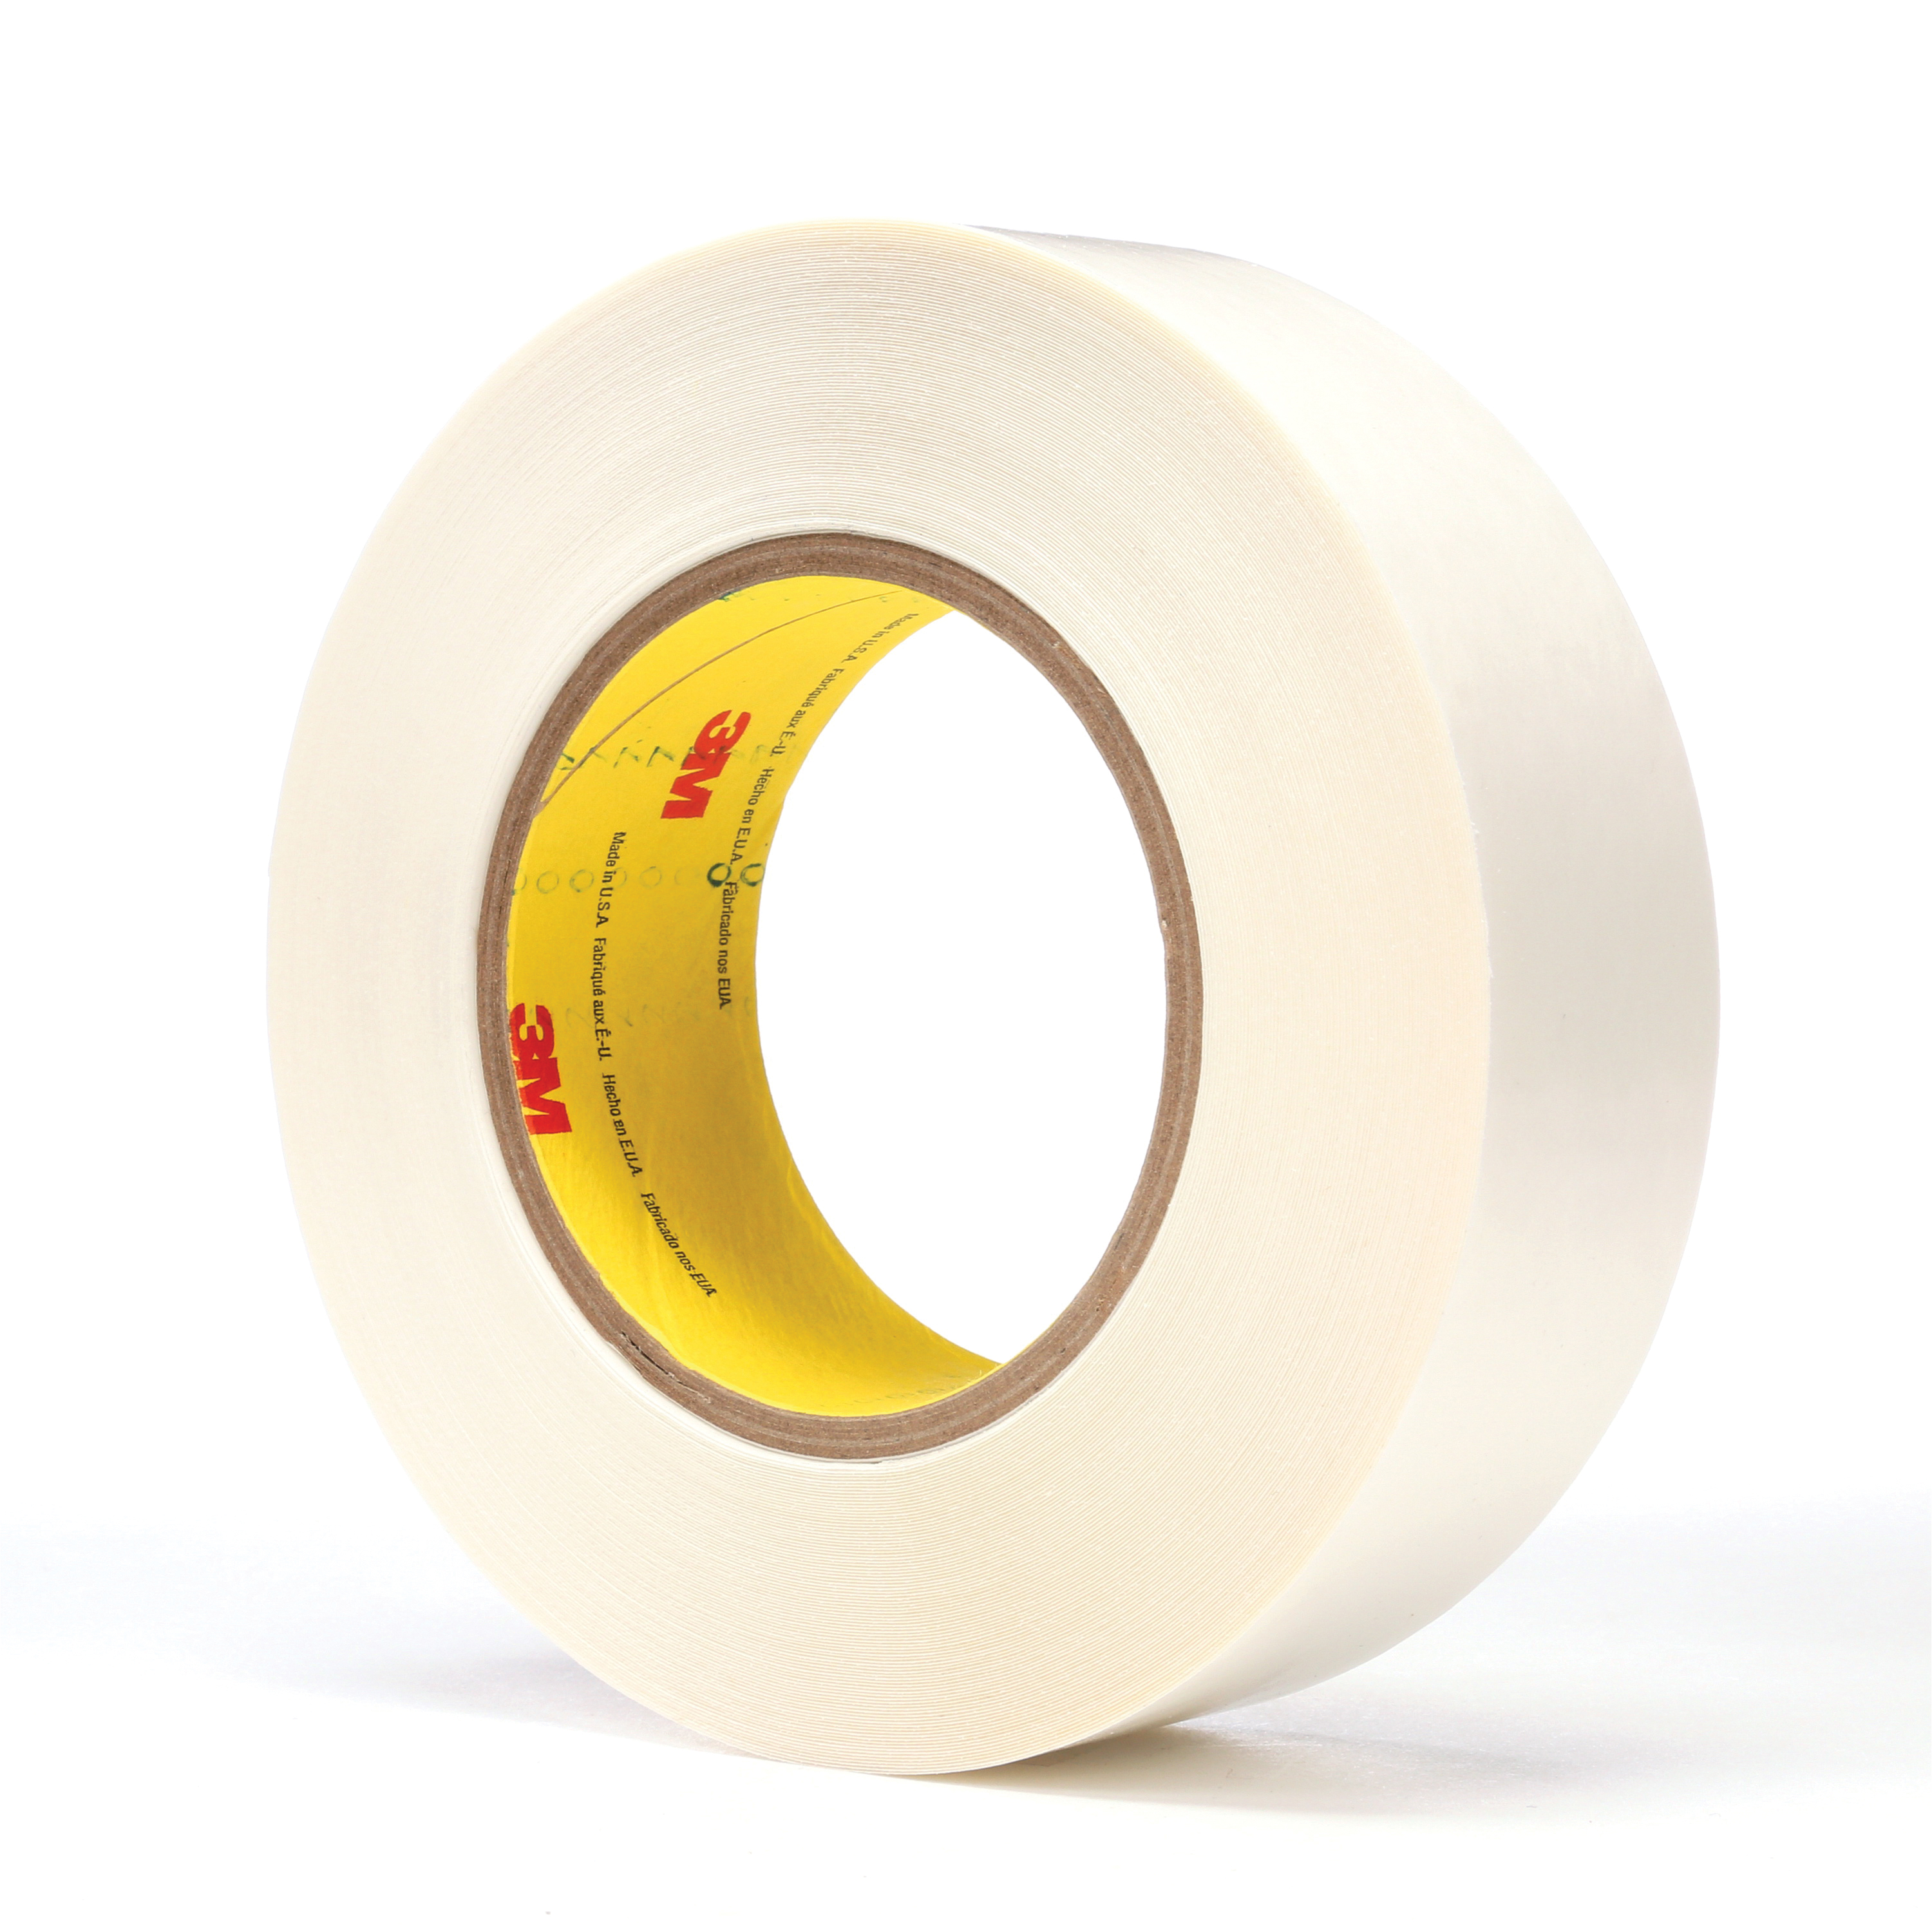 3M™ 021200-65870 Double Coated Tape, 36 yd L x 1-1/2 in W, 9 mil THK, Synthetic Rubber Adhesive, Polyethylene Backing, White